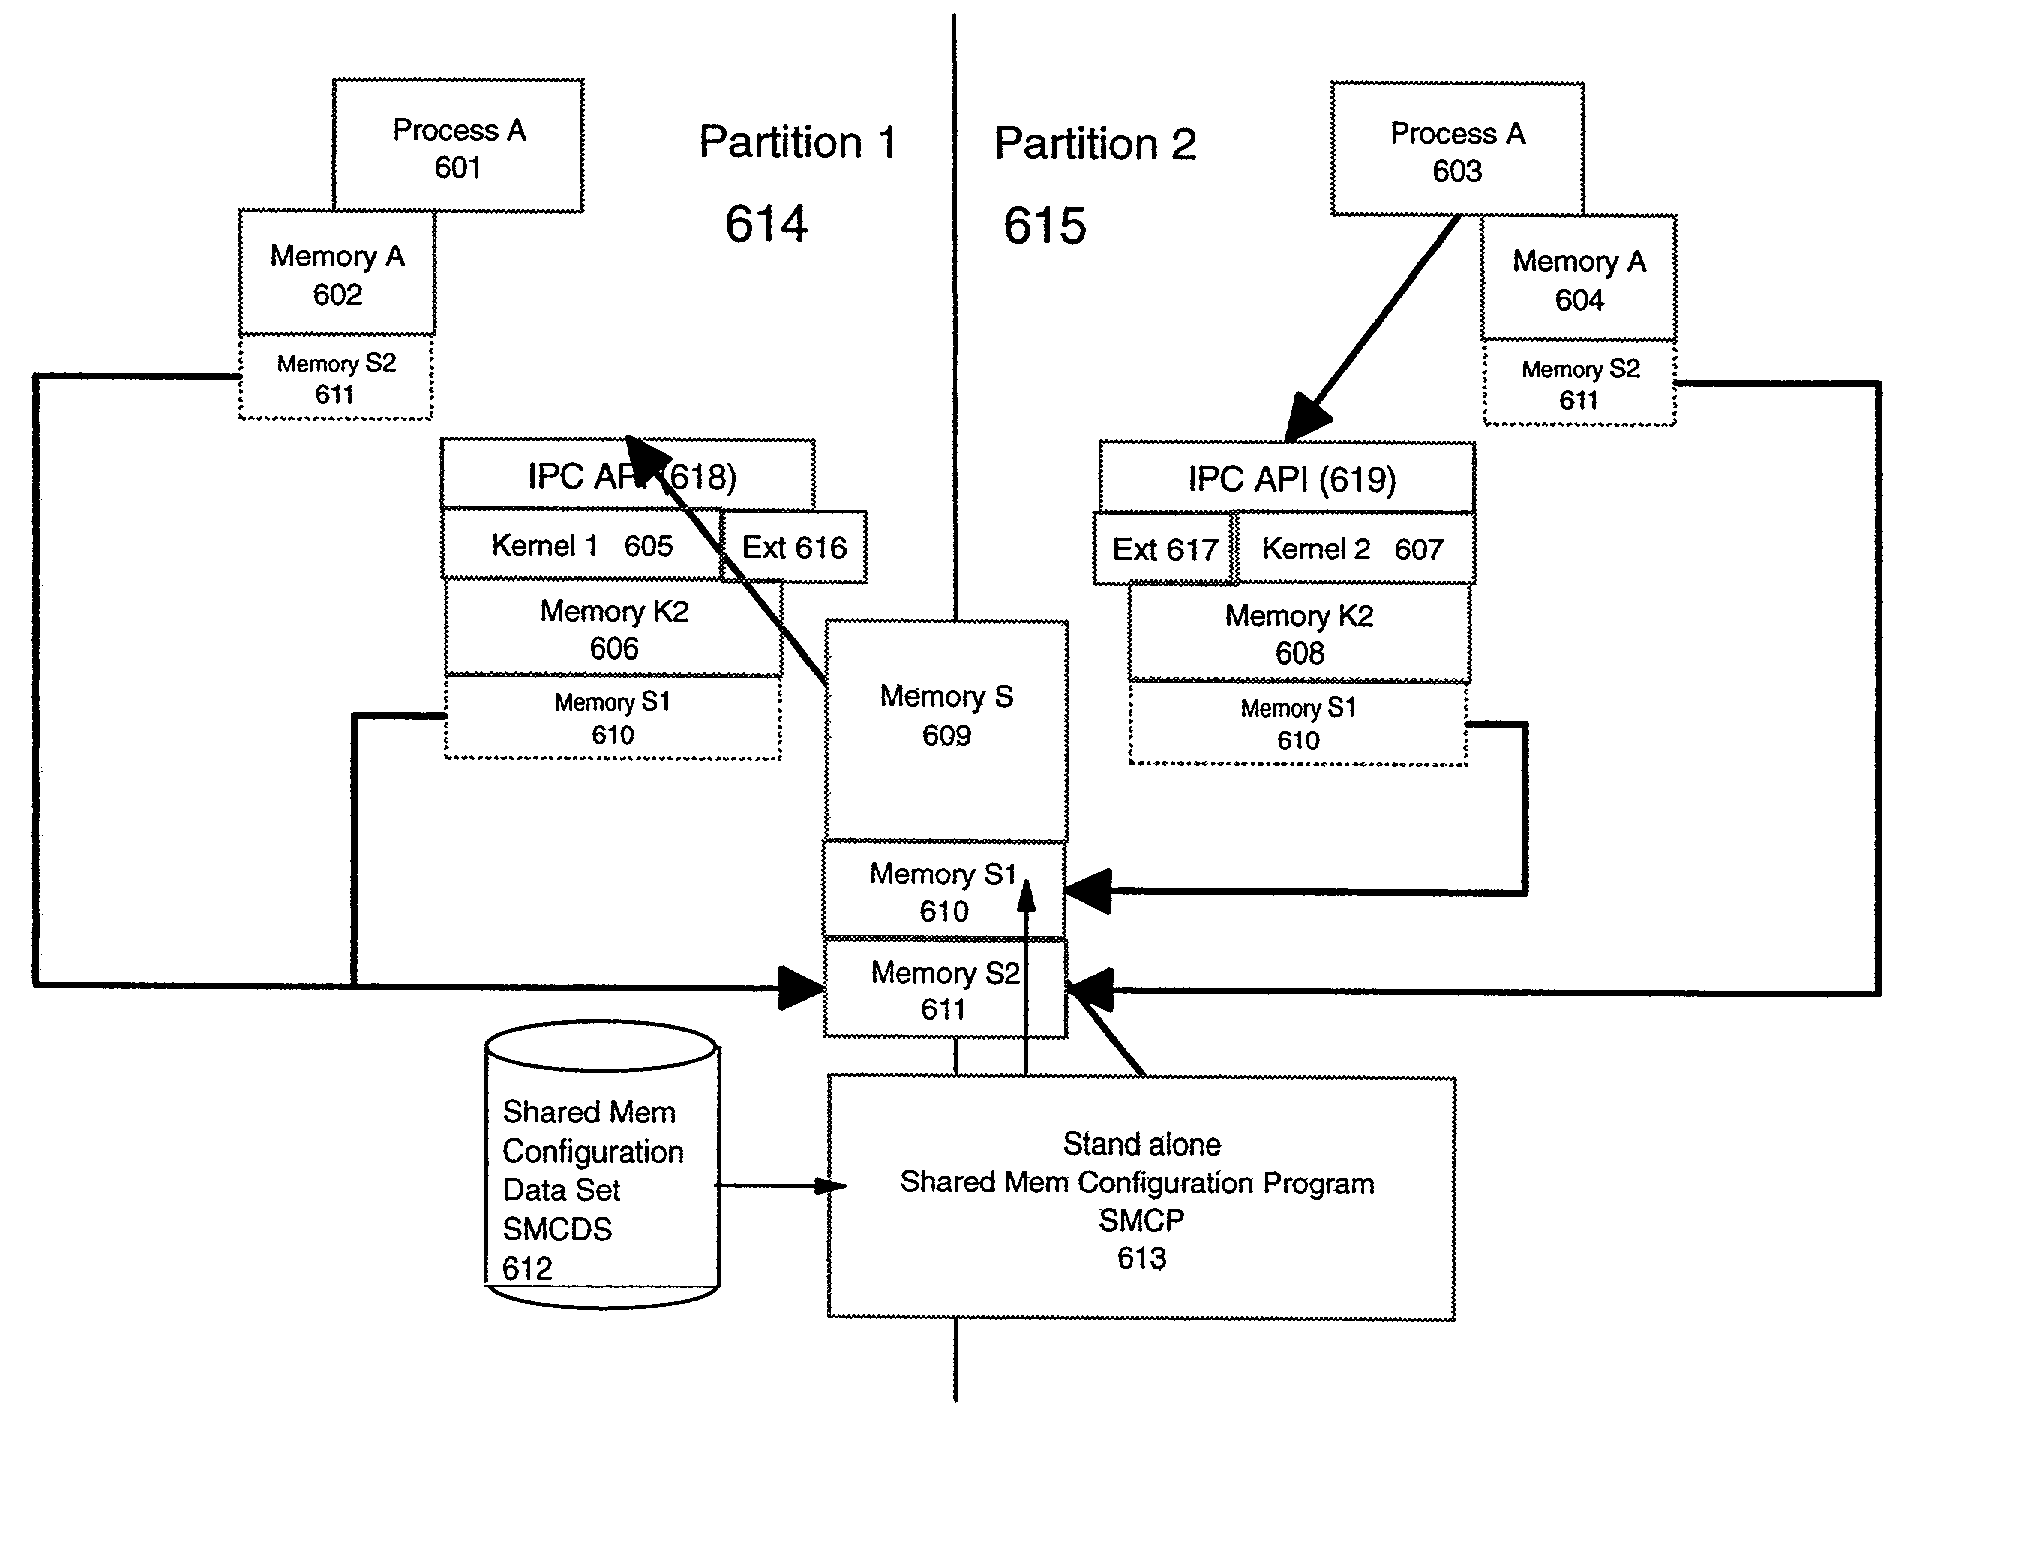 Inter-partition message passing method, system and program product for managing workload in a partitioned processing environment